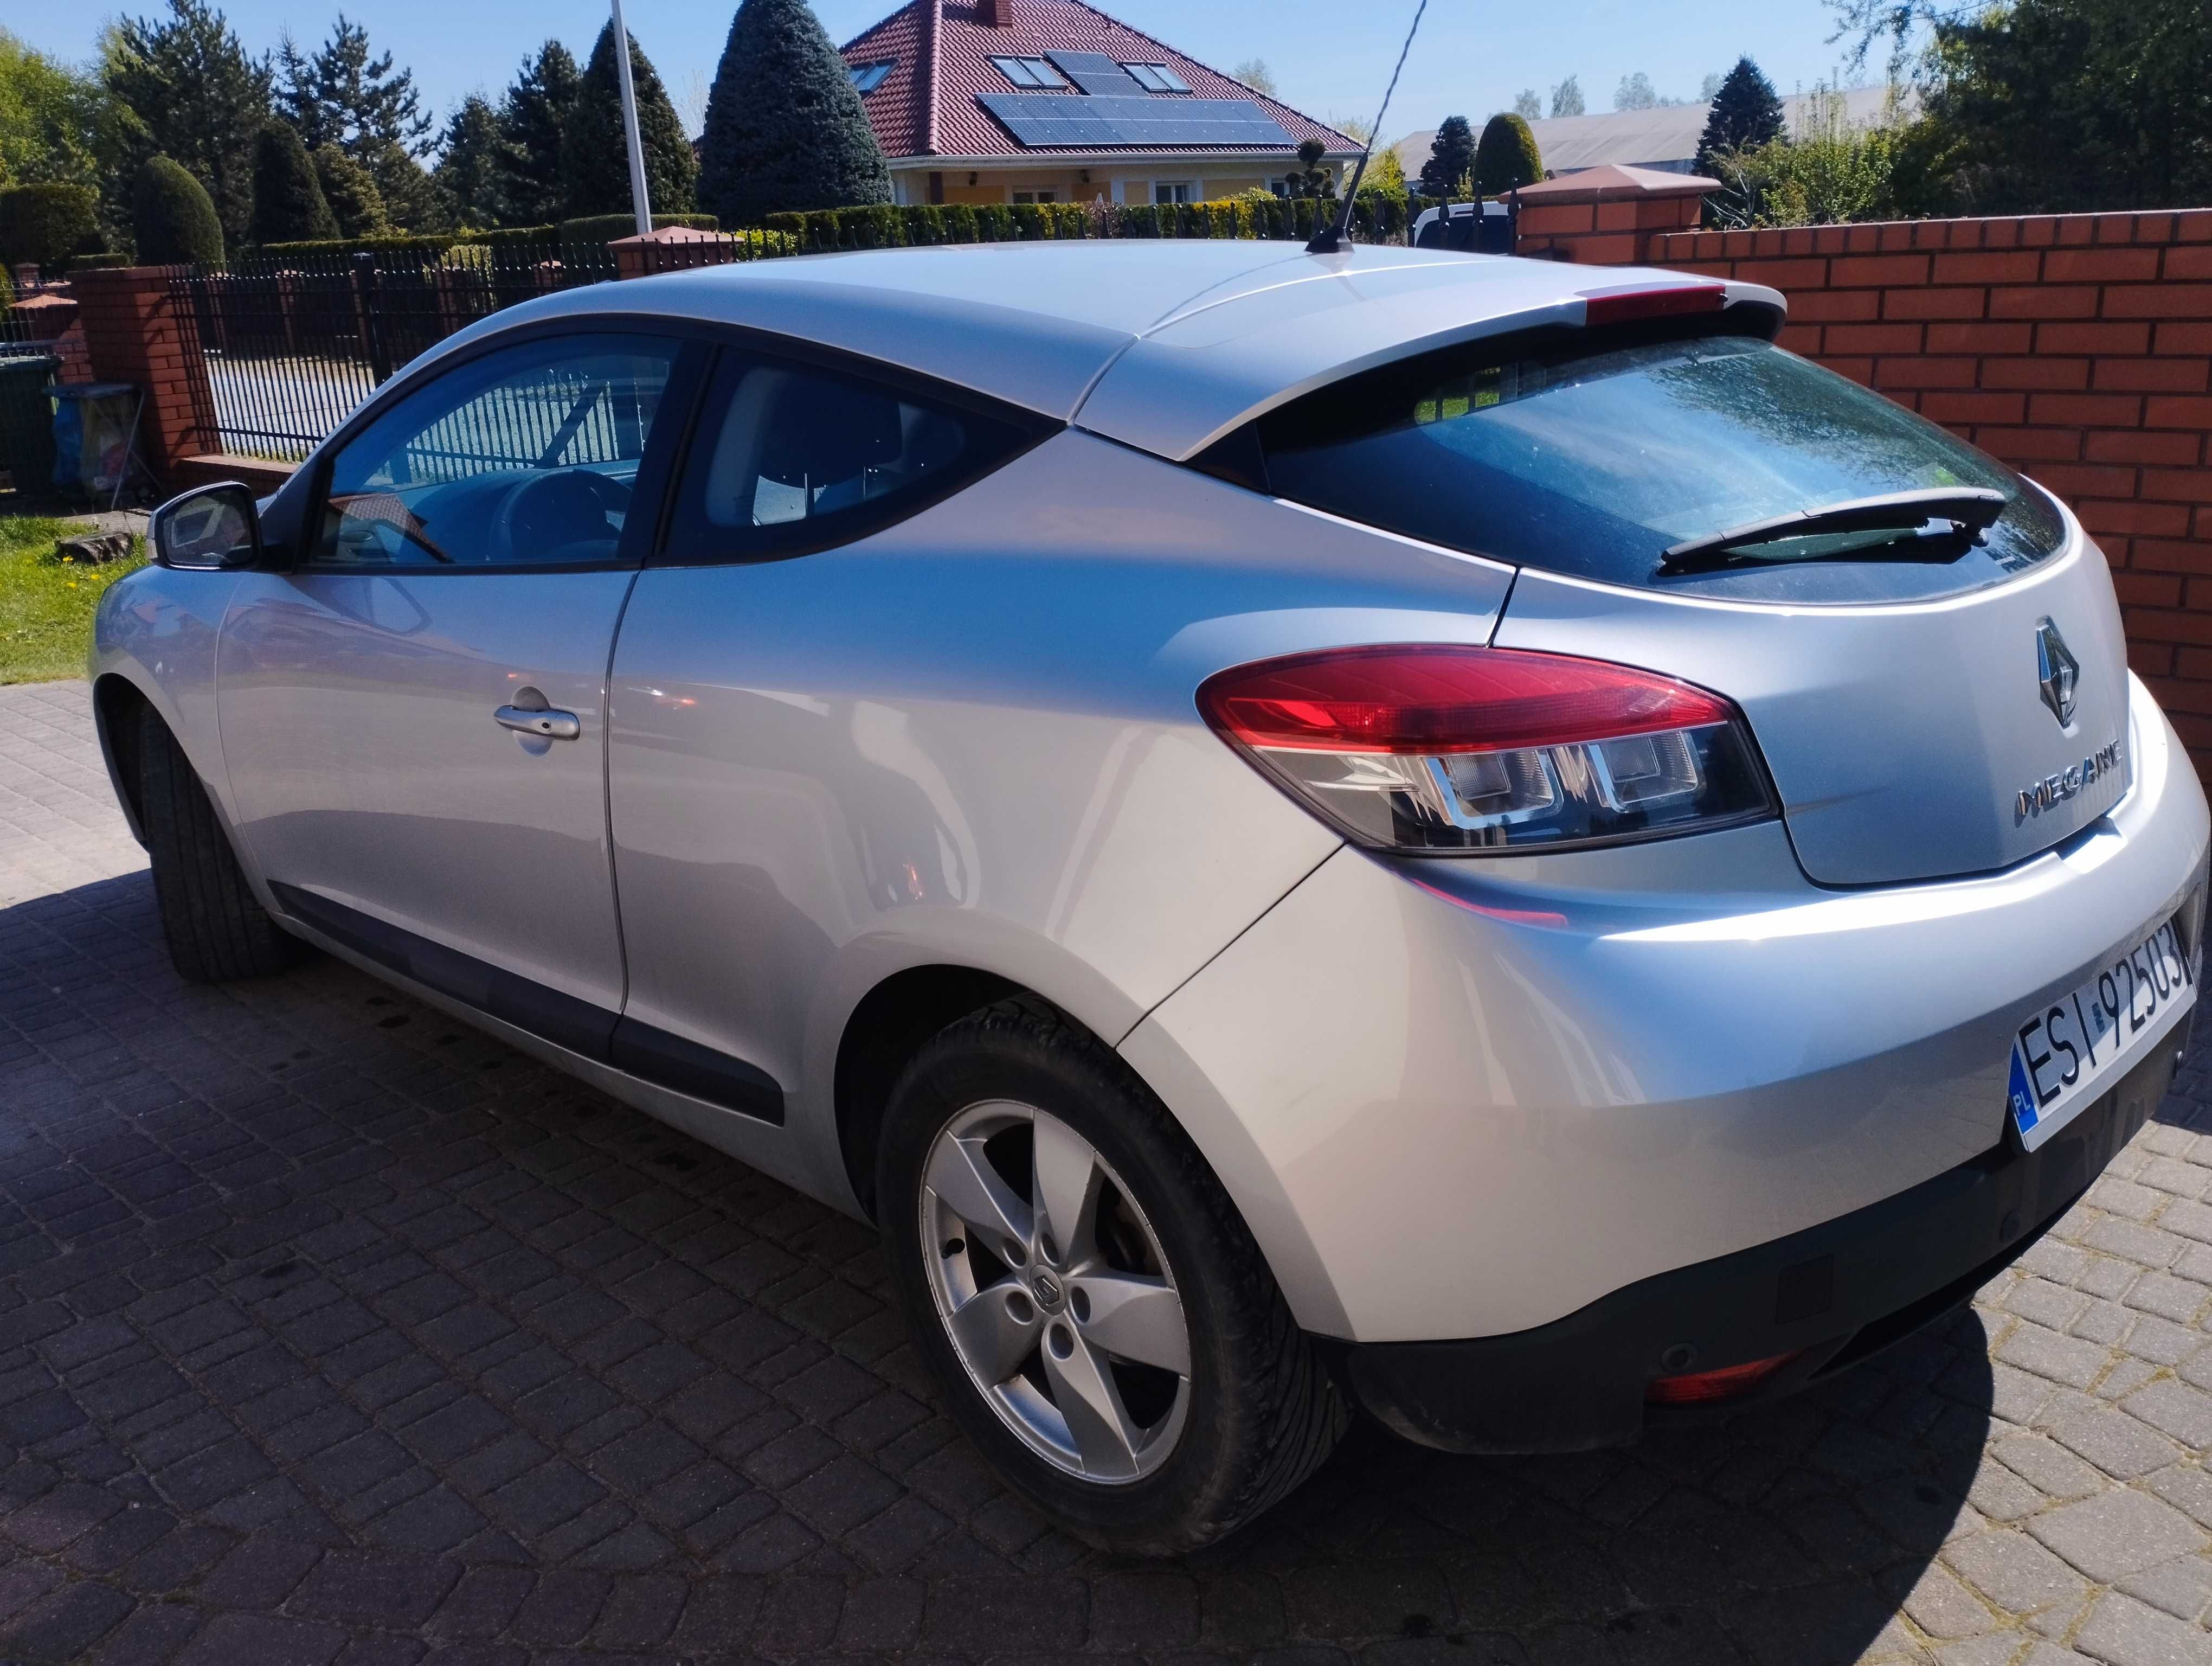 Renault Megane Coupe 1,5dci 2010r 132 tys.km